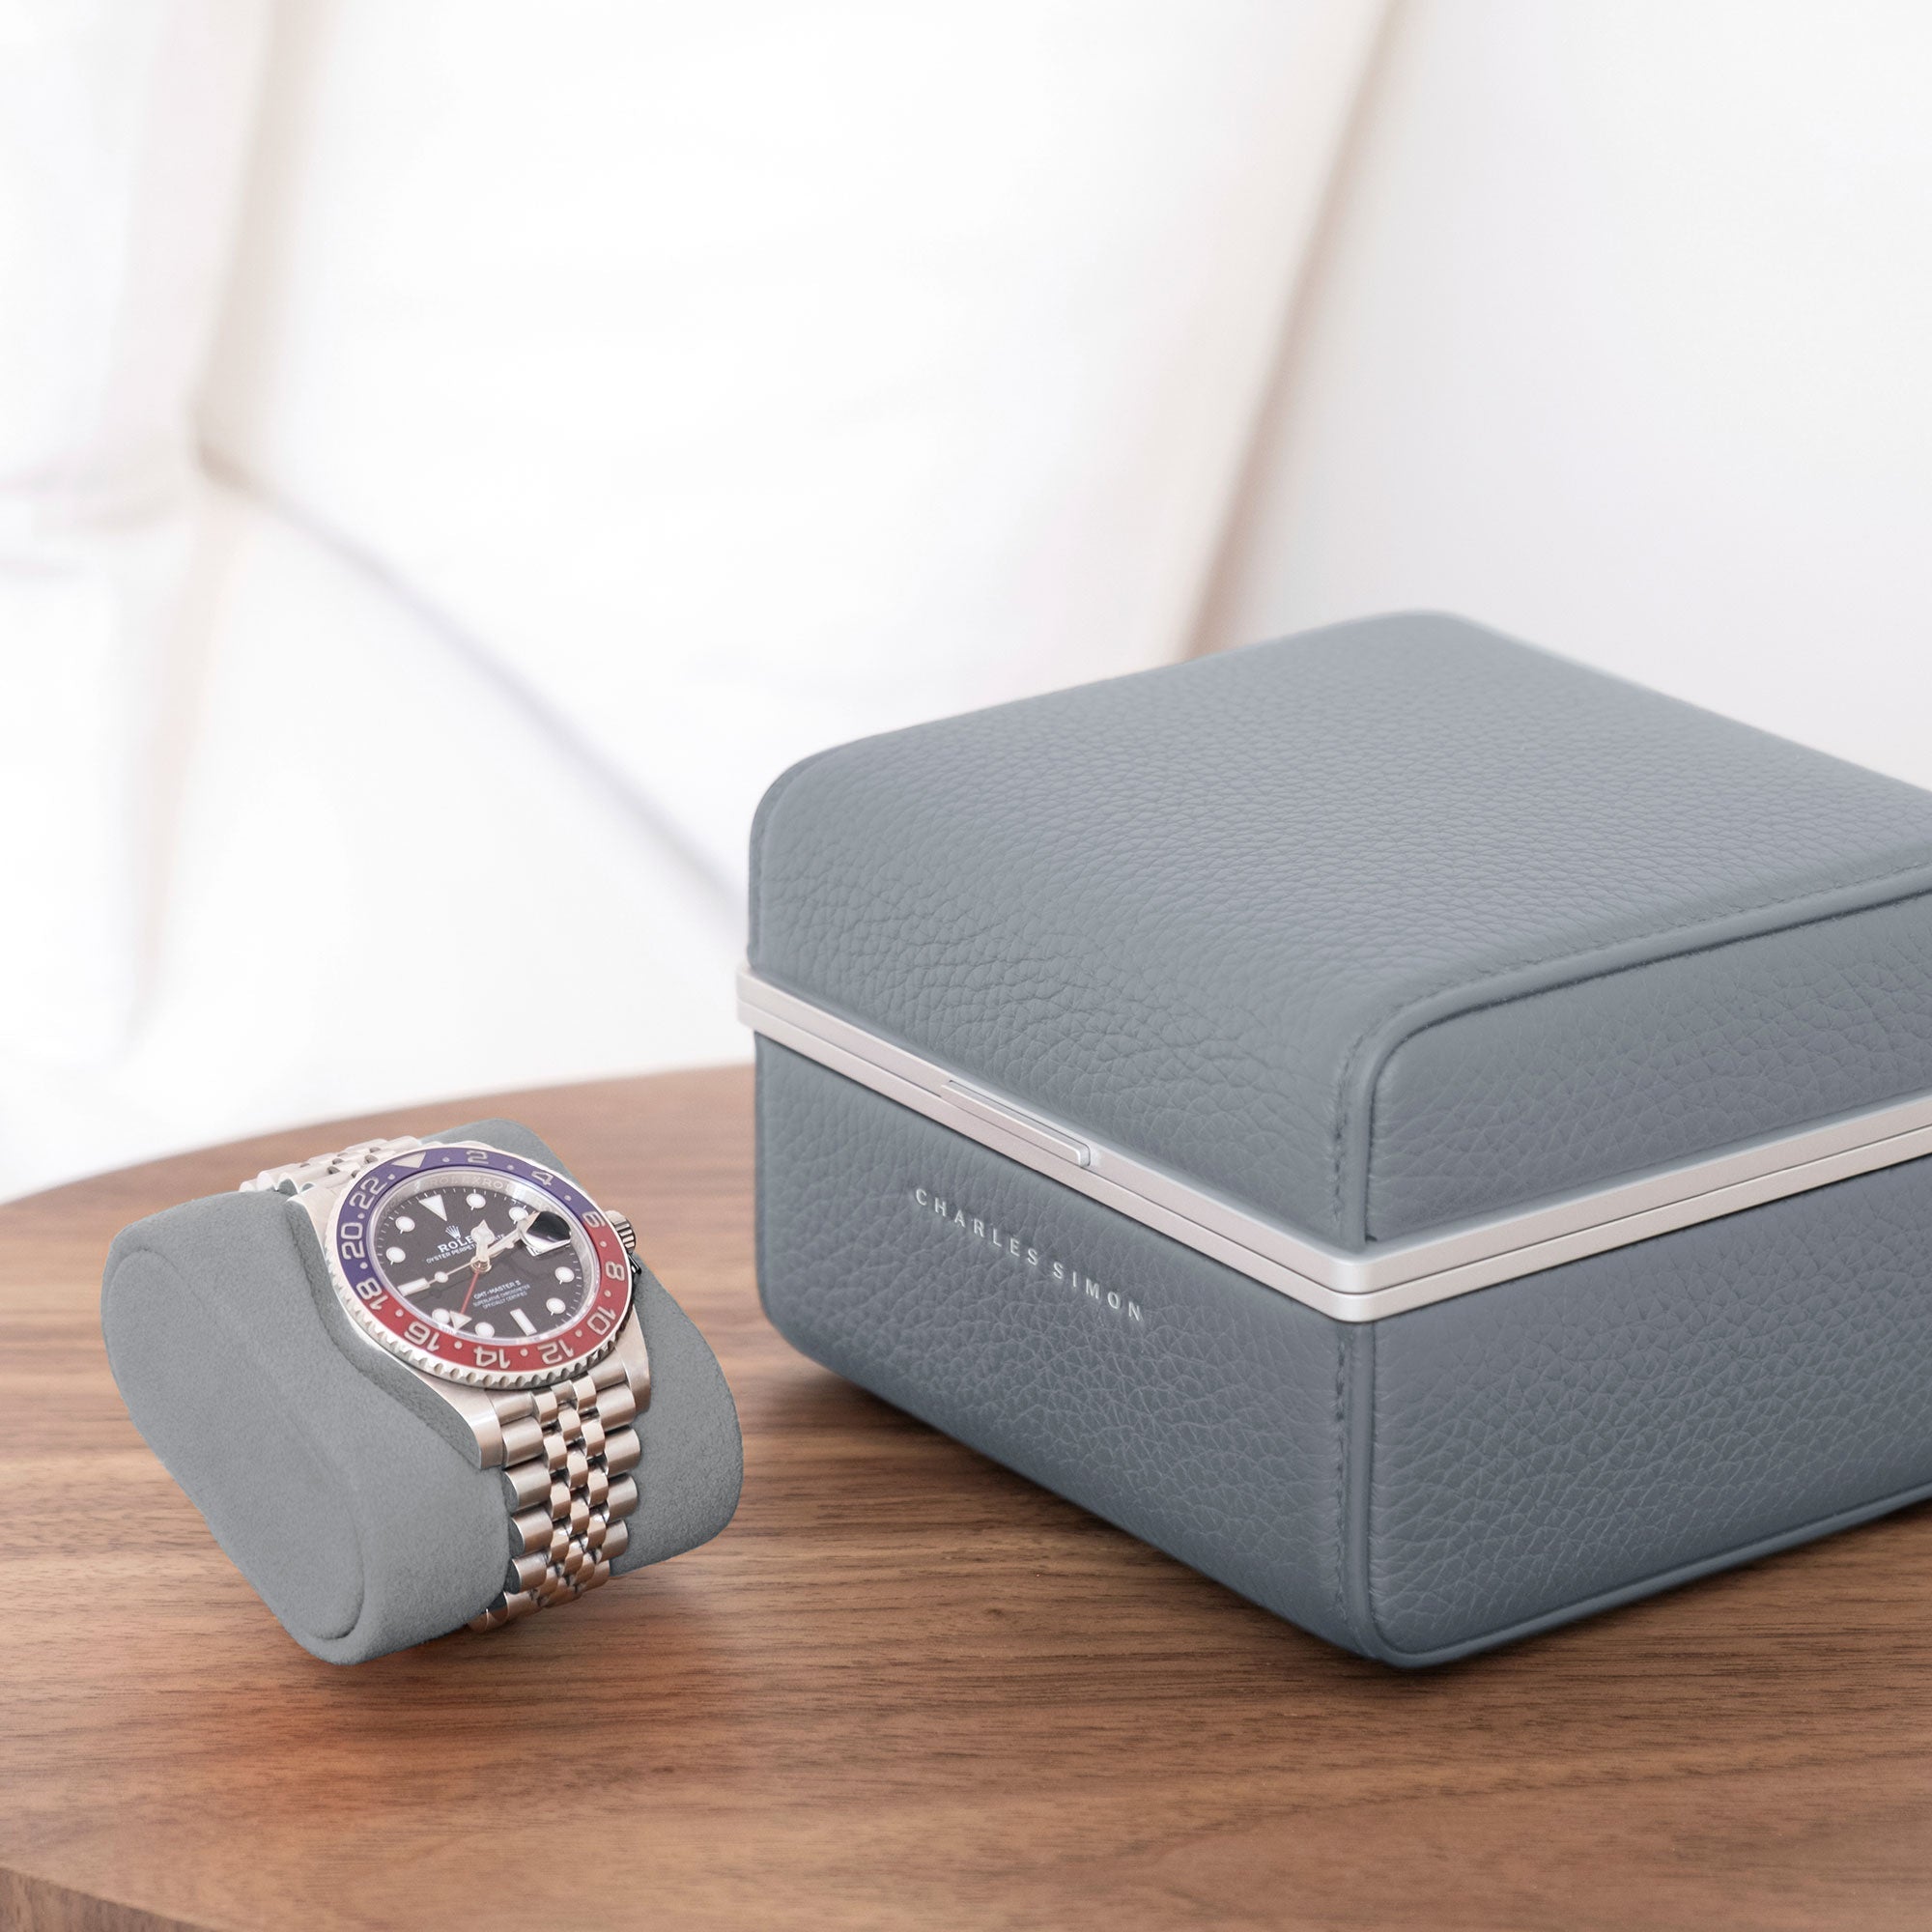 Lifestyle photo of Eaton 1 Watch case in cloud grey leather and fog grey Alcantara interior. Rolex Pepsi is placed on removable Alcantara cushion next to closed luxury watch case.